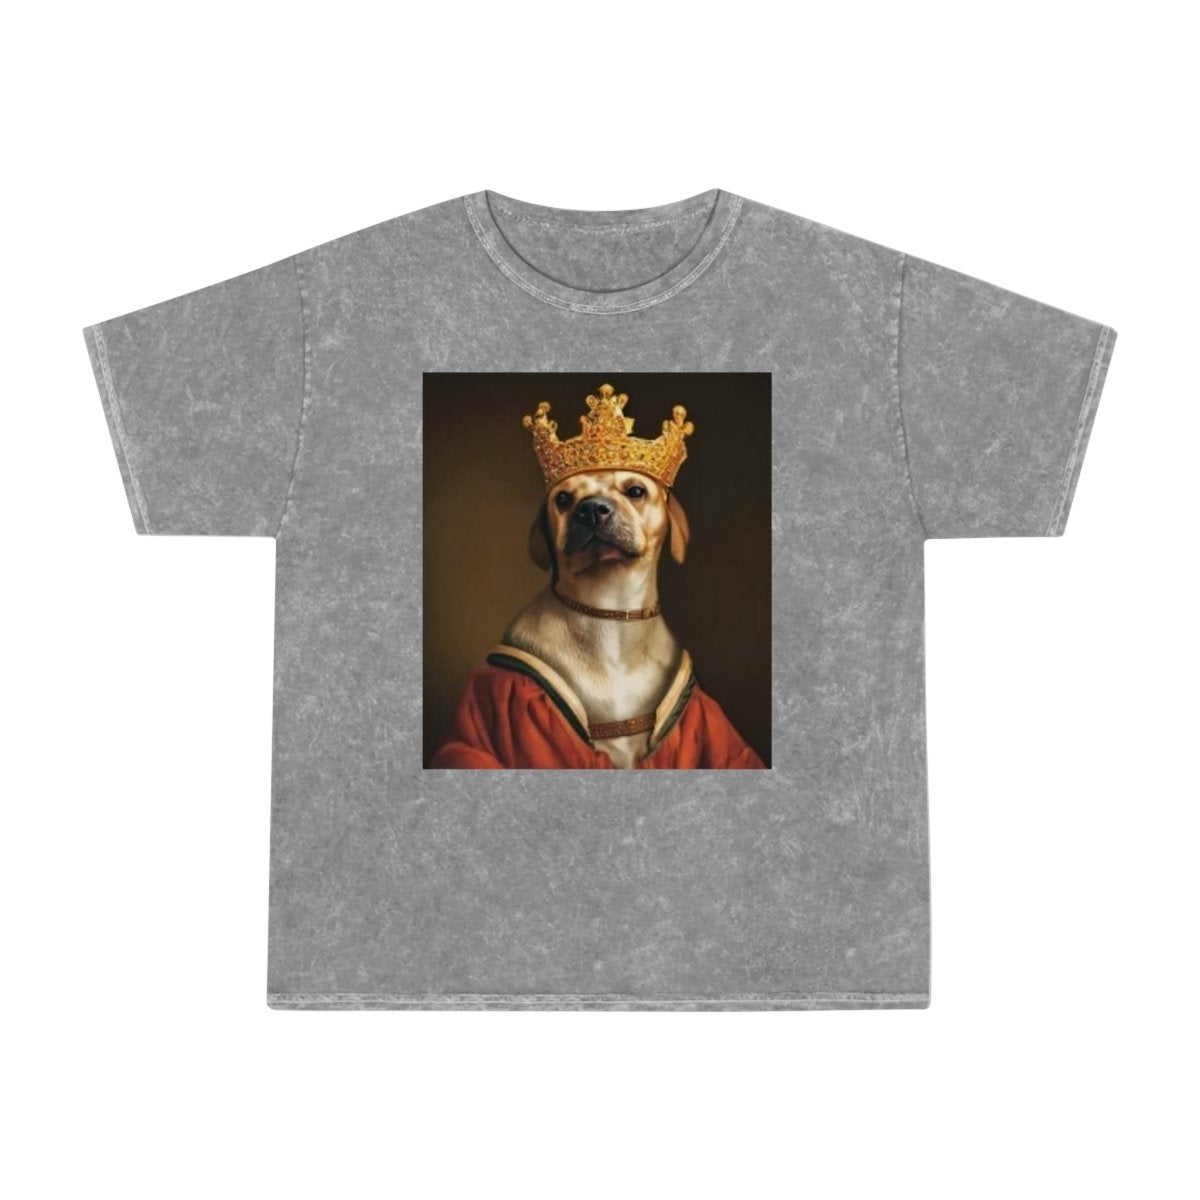 Royal Dog Mineral Wash T-Shirt - Style A - DarzyStore